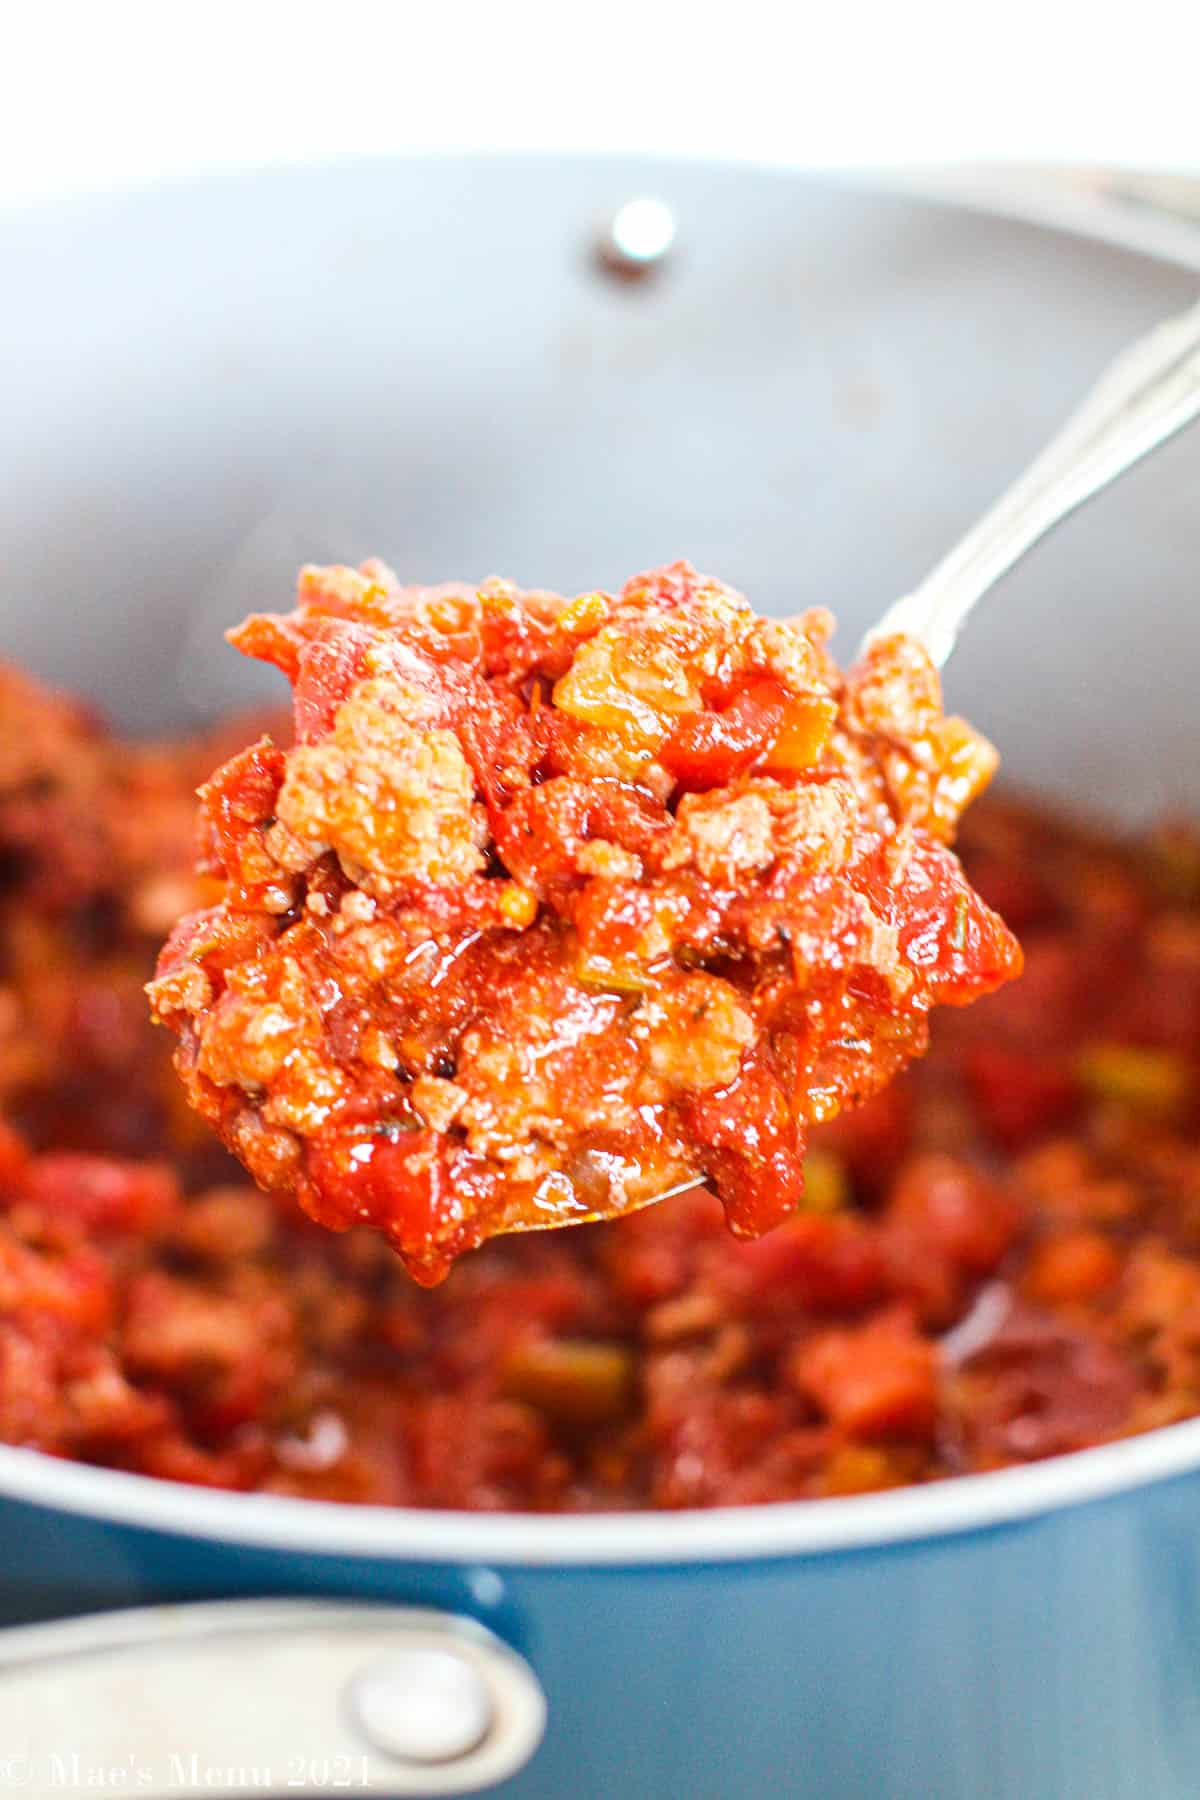 A large scoop of chicken bolognese sauce over a pot of the sauce